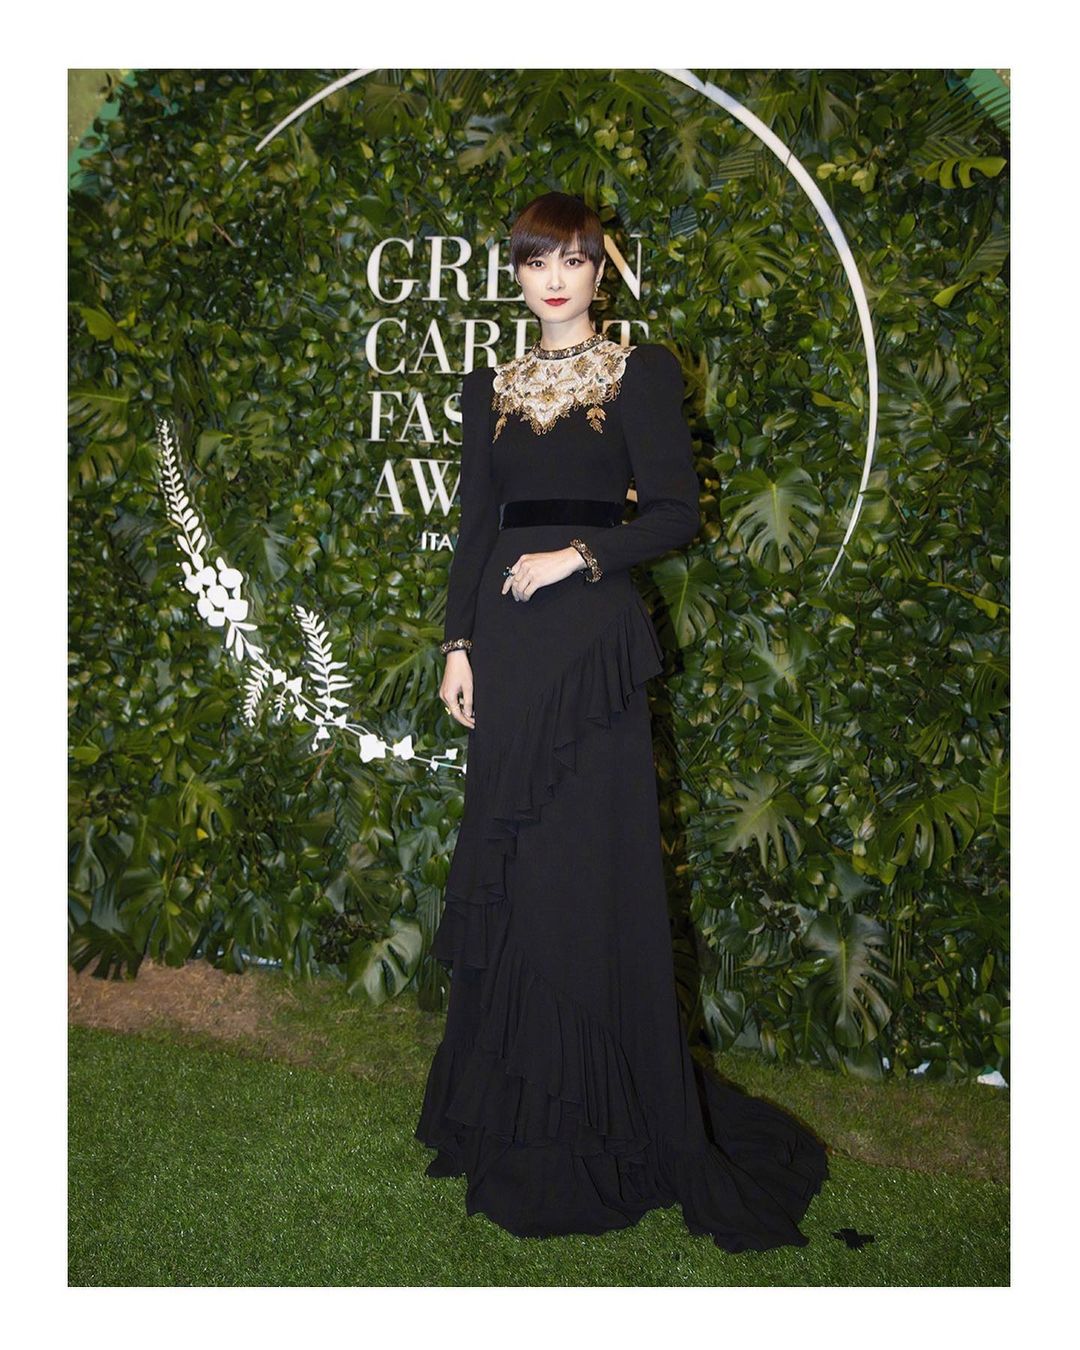 Gucci Official - Recipient of the Asia Changemaker Award, #ChrisLee @urnotchrislee and #SongYanfei @ceciboey both wearing #Gucci at the first digital Green Carpet Awards. Chris Lee wore a high neck go...